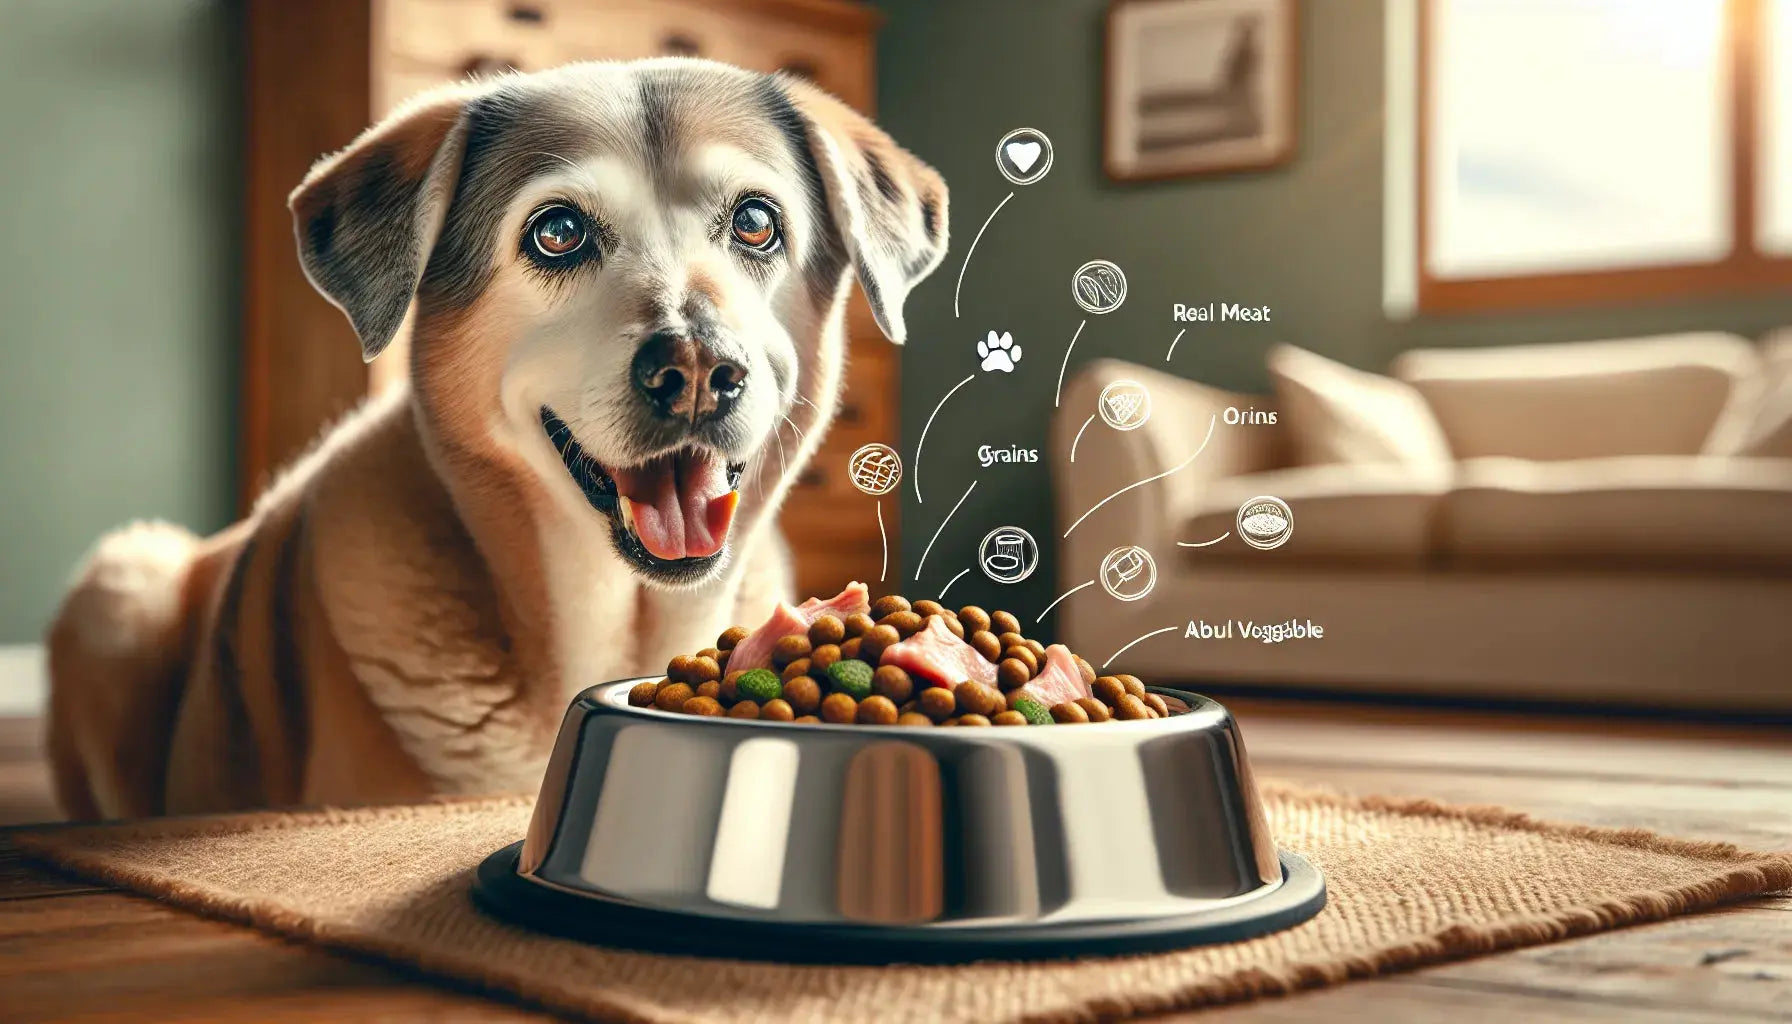 The Best Senior Dog Food: Evangers for Your Aging Pet